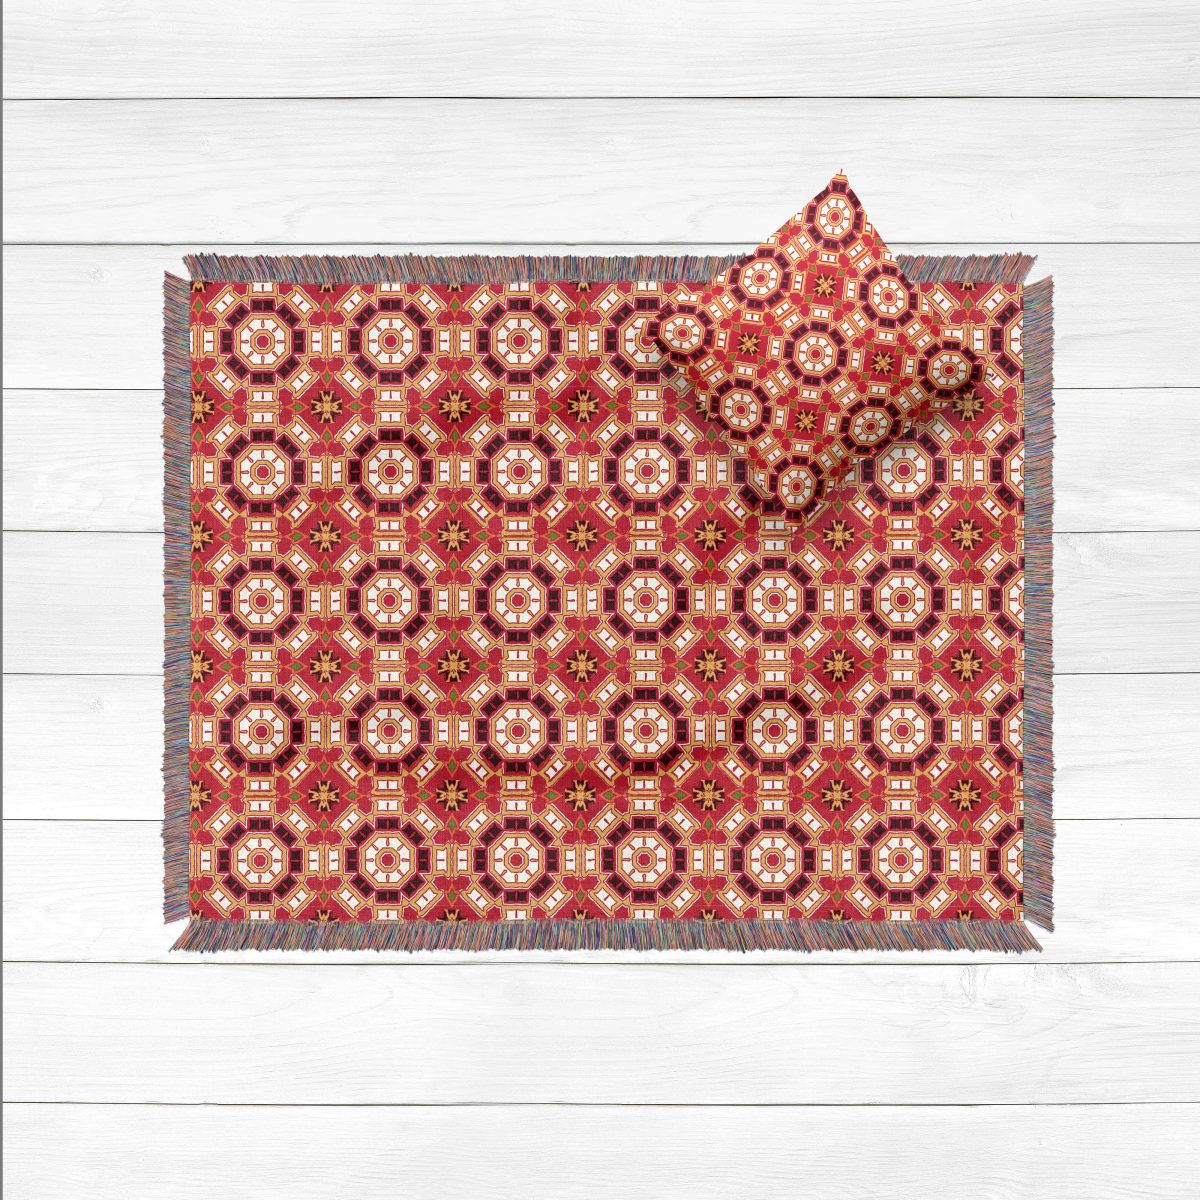 Quilt design 5 Red 01 Top View